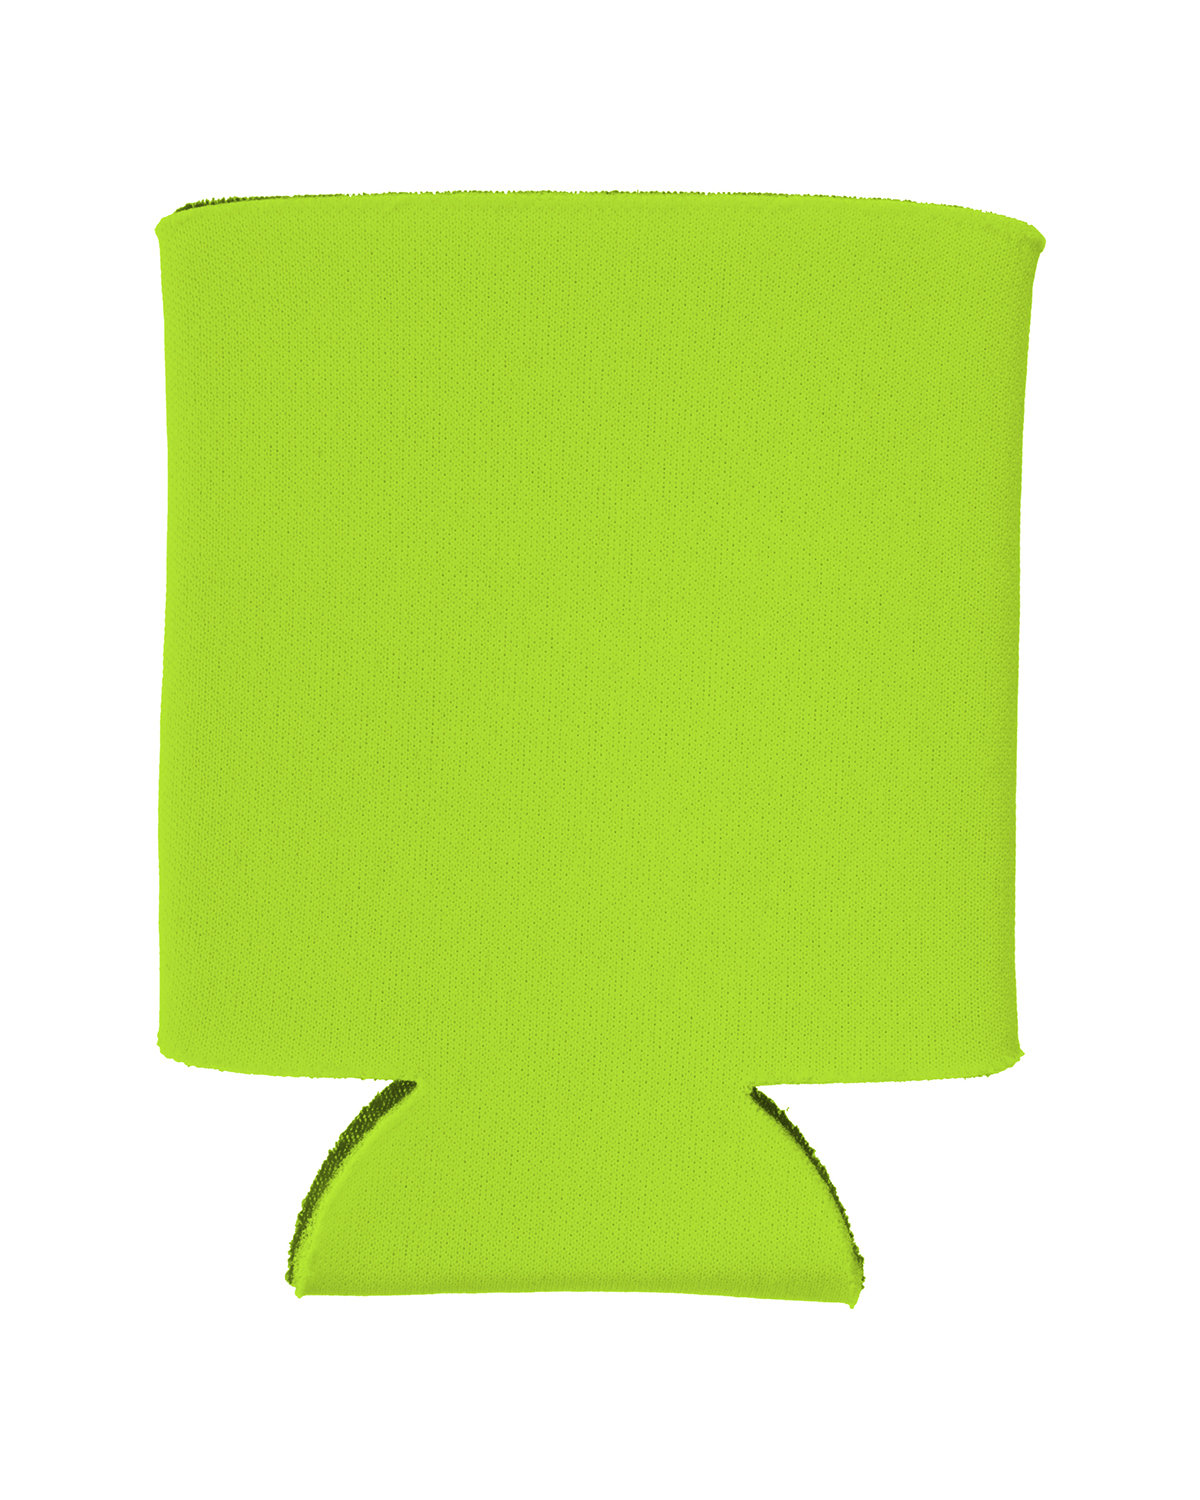 Prime Line Folding Can Cooler Sleeve lime green 